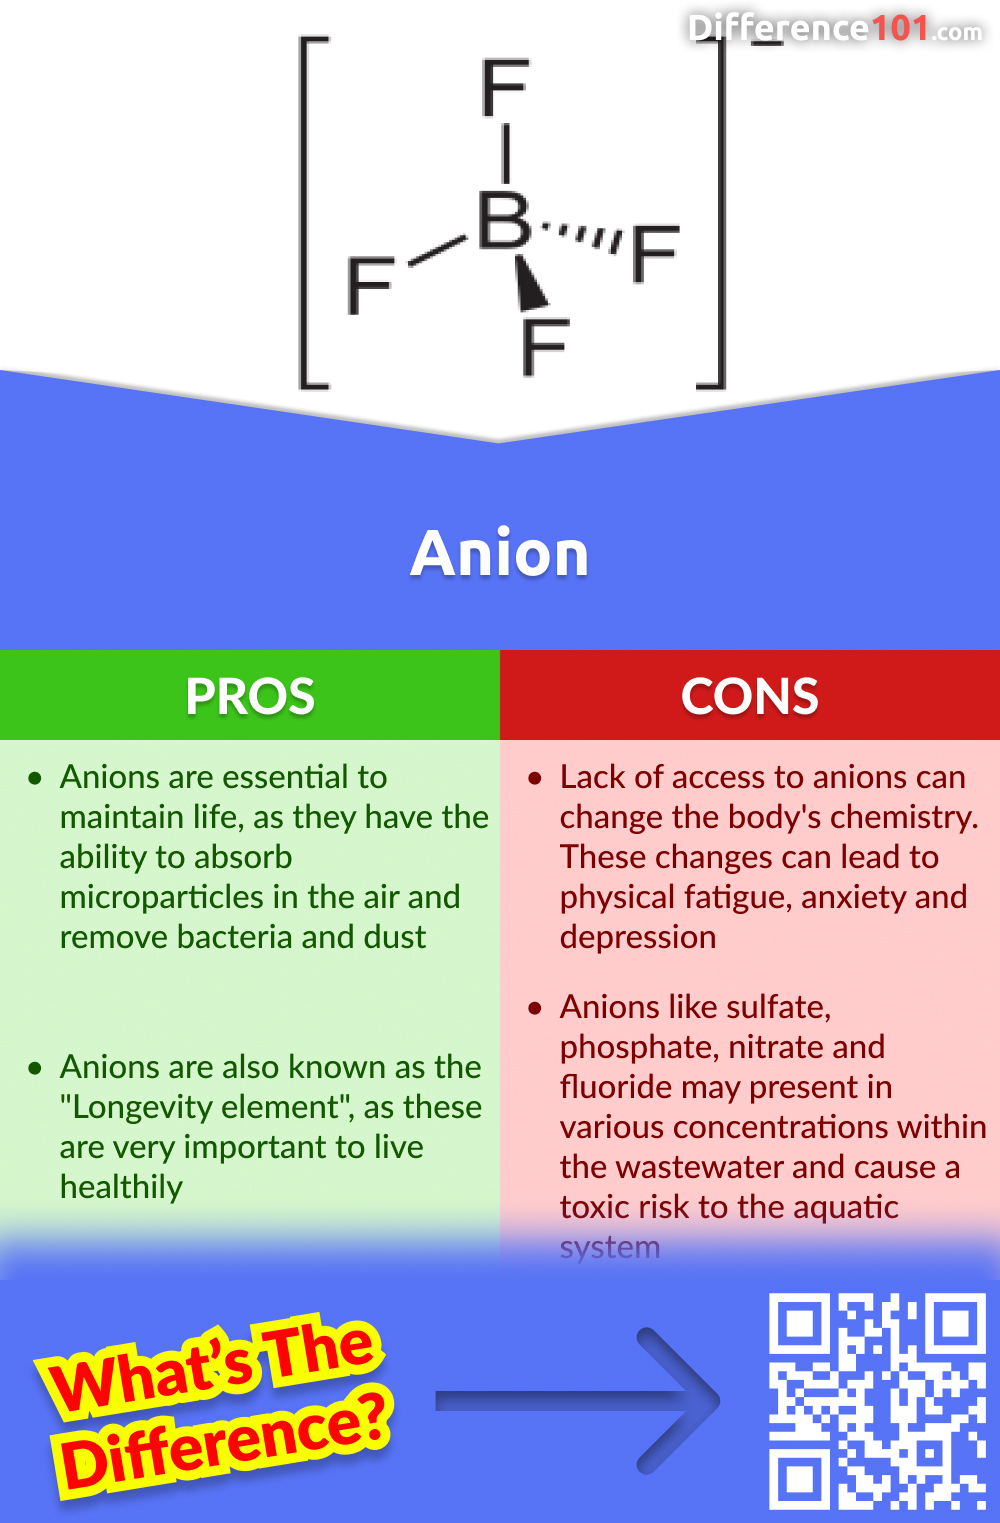 Anion Pros and Cons